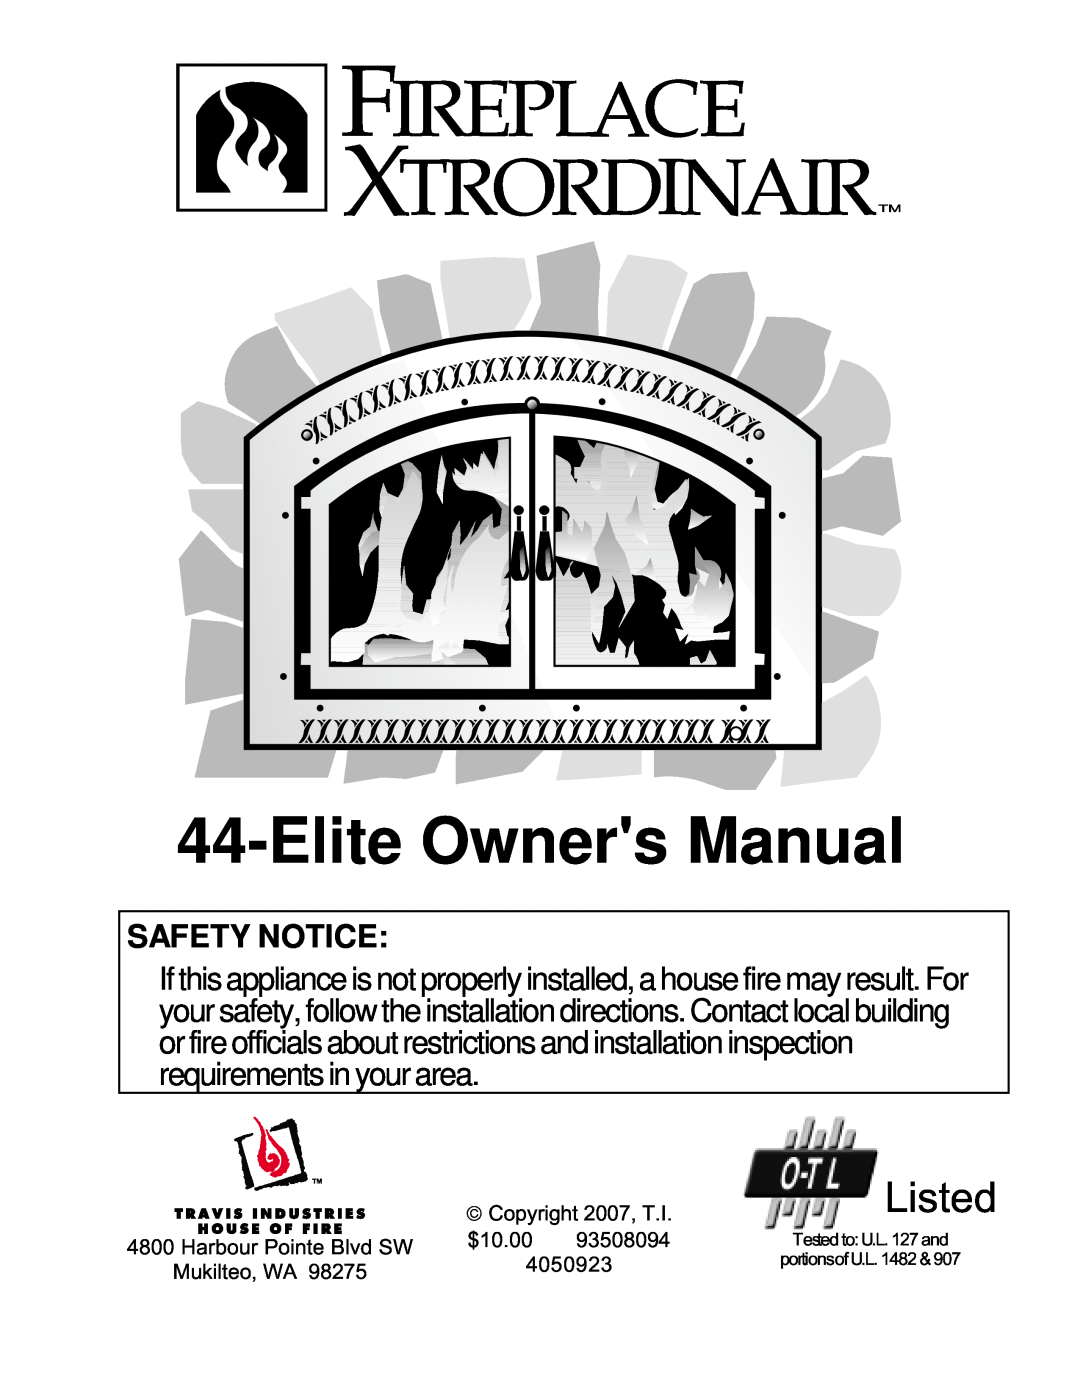 FireplaceXtrordinair 44-Elite owner manual Listed, Safety Notice 